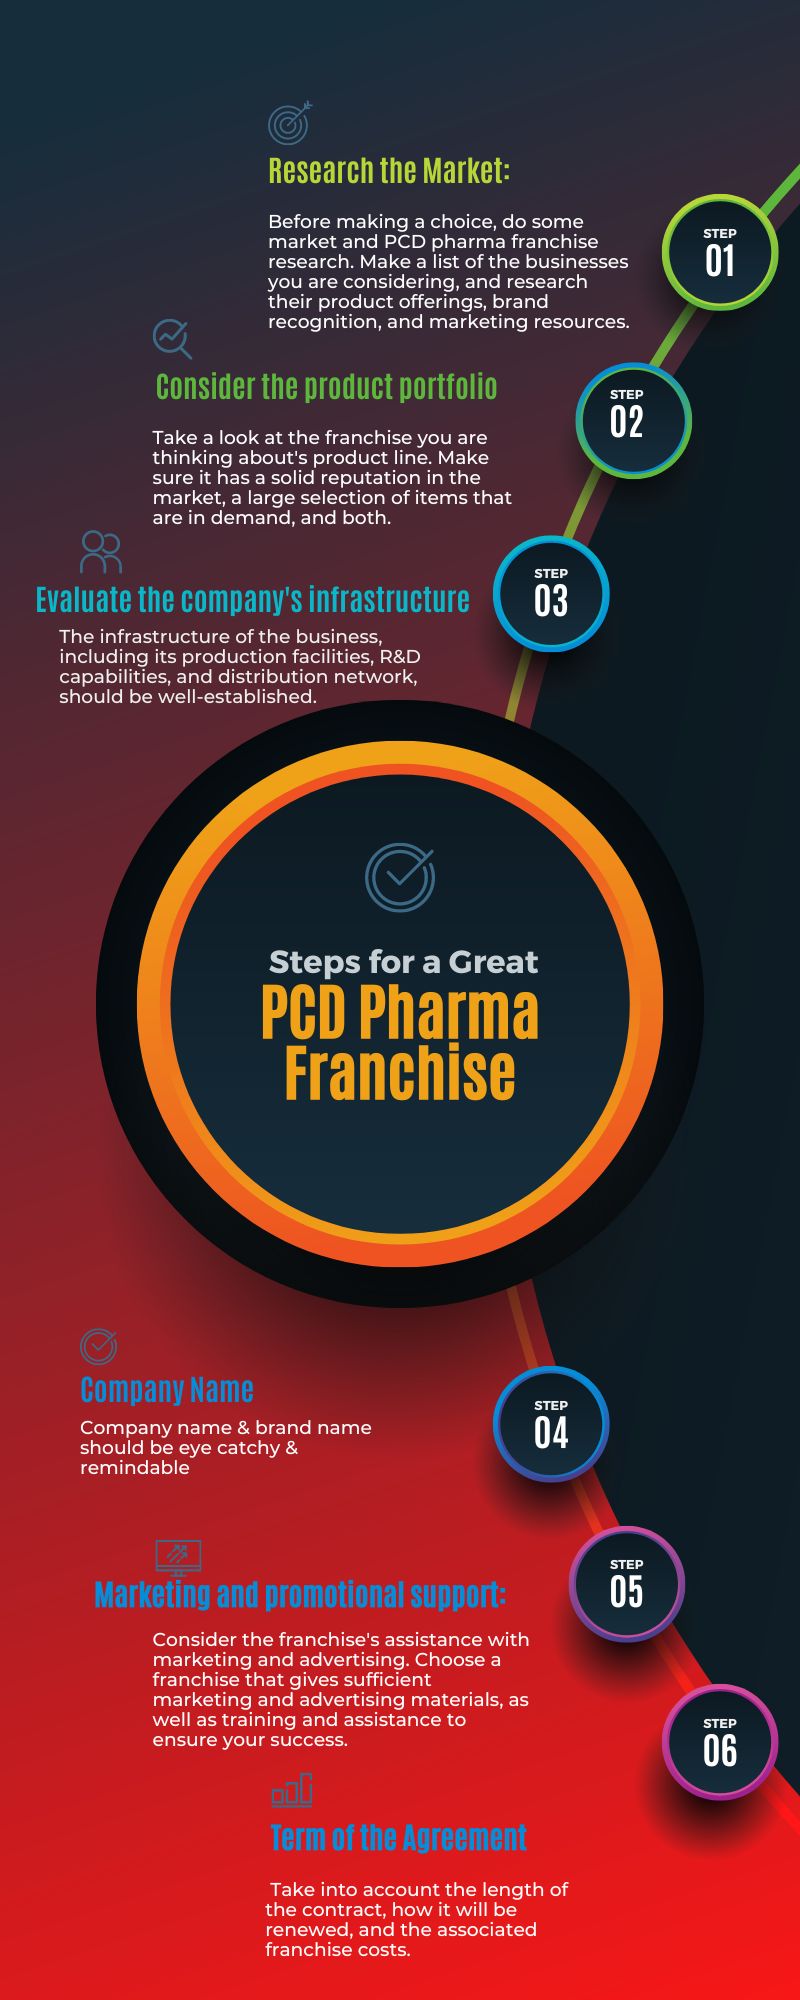 Top Pcd Pharma Franchise Company in India